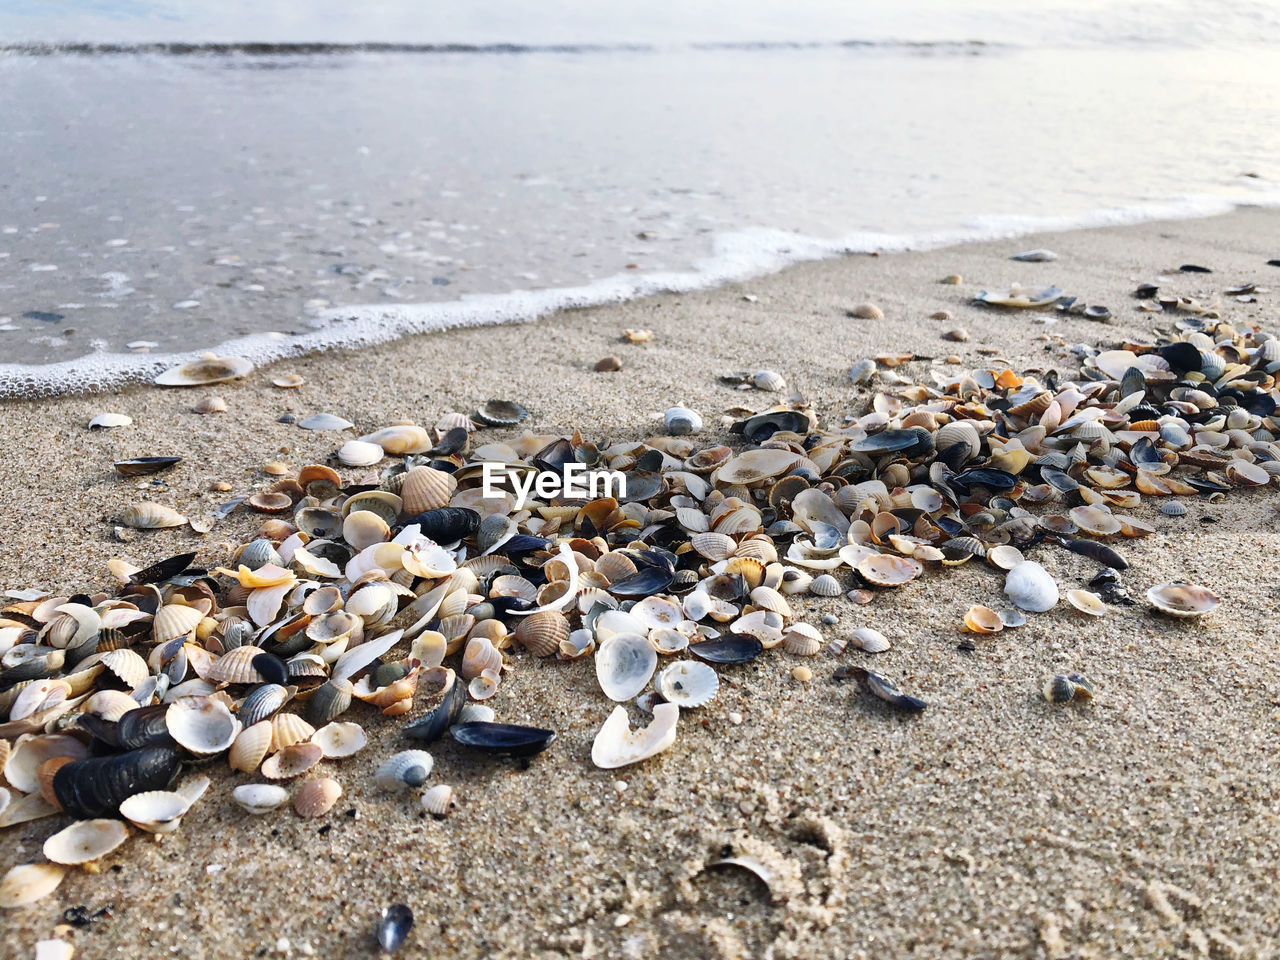 Surface level of shells on shore